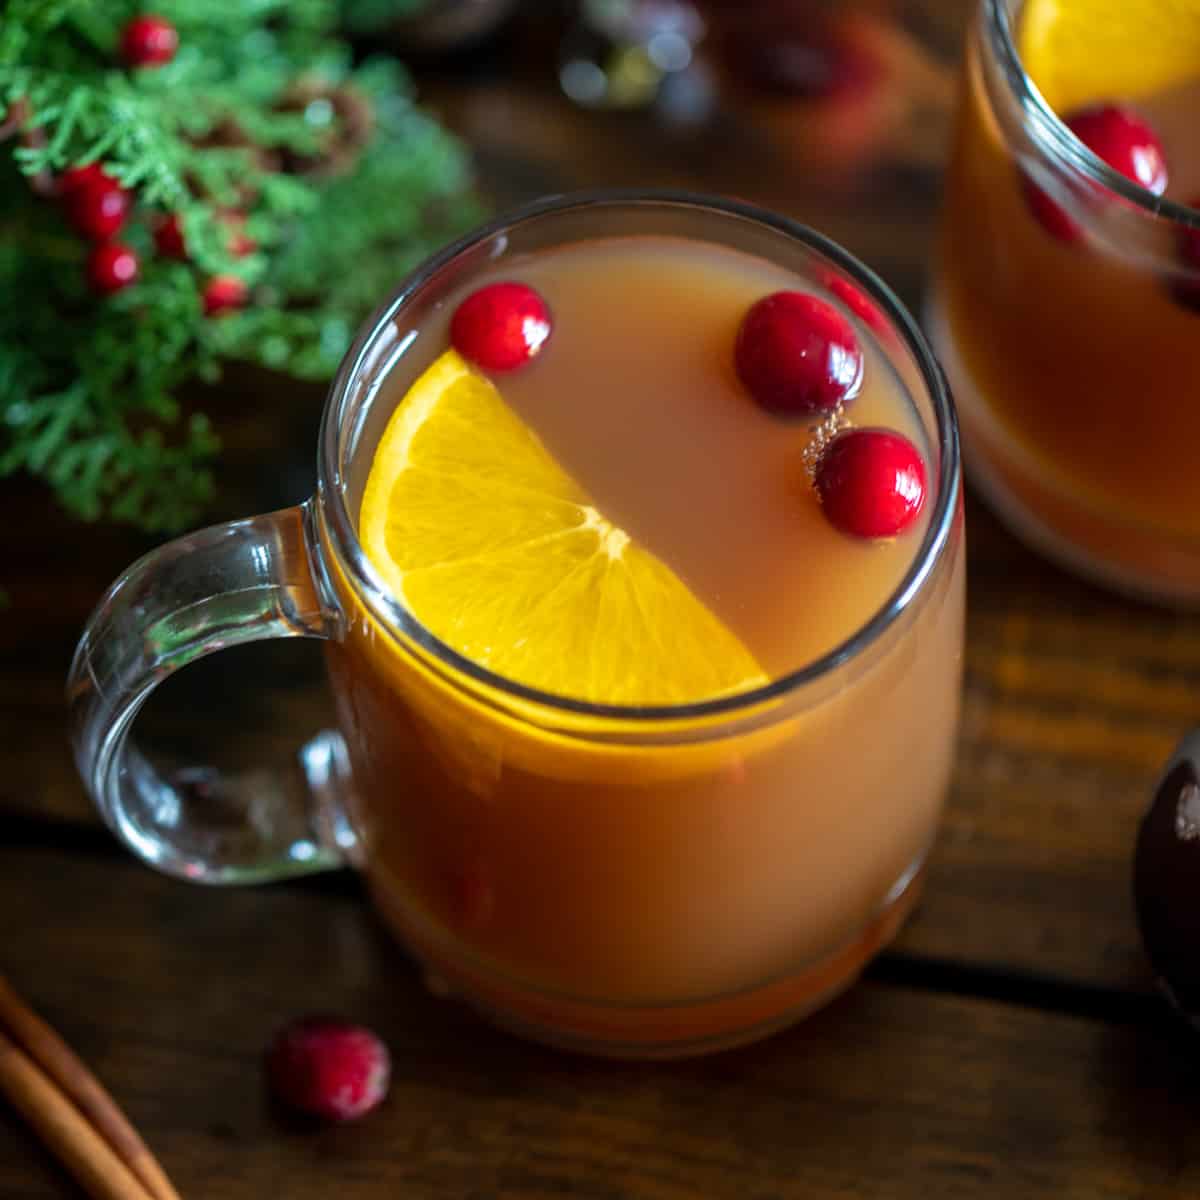 Top down view of glass of spiced Christmas tea served with wedge of an orange and fresh cranberries.